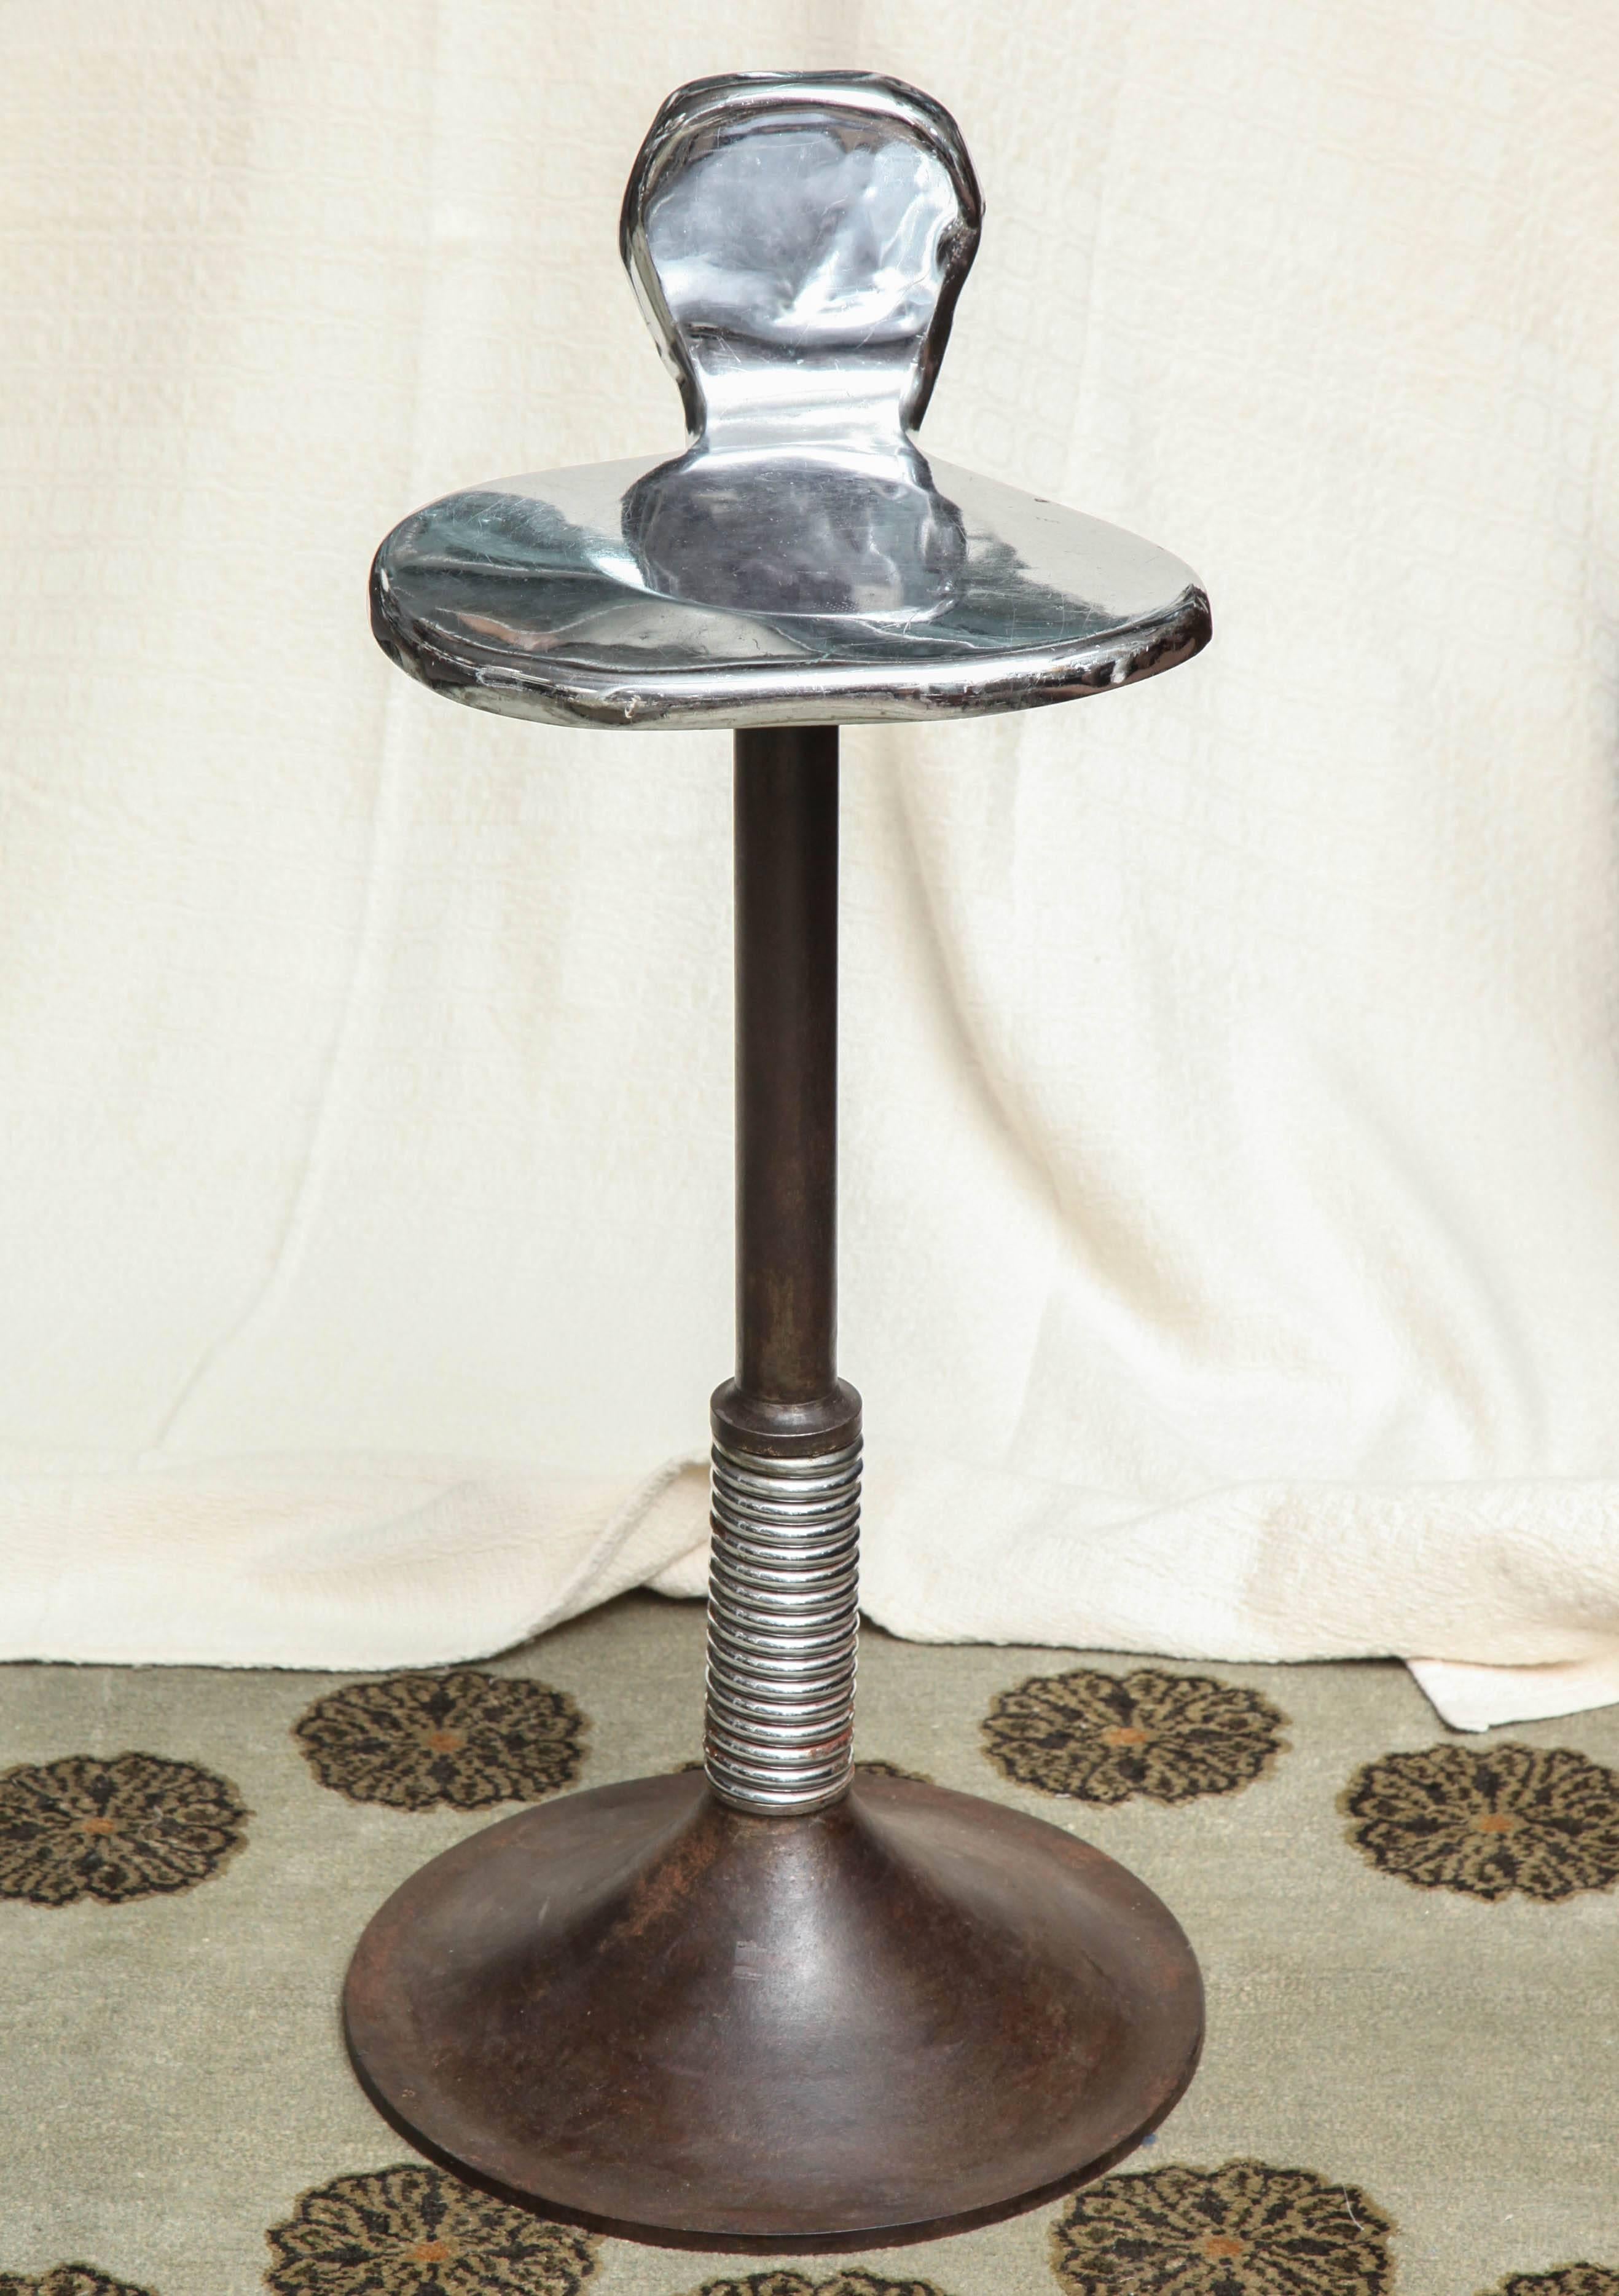 Steel stool with spring and chrome-plated amorphic seat, circa 1940.